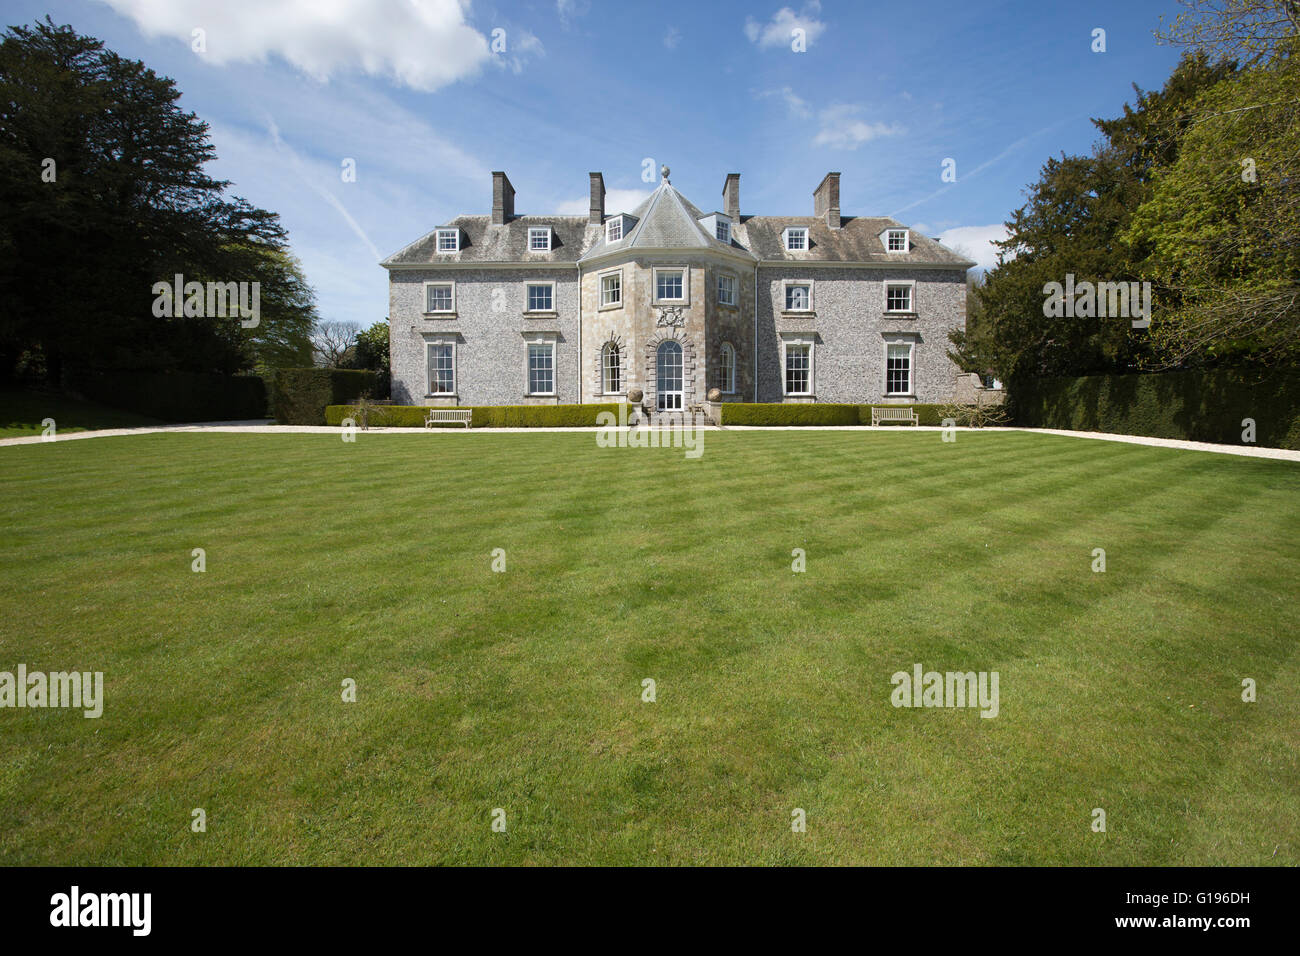 Farleigh House, Farleigh Wallop, ancestral estate of 34 year old Oliver Wallop, Viscount Lymington in Hampshire, England, UK Stock Photo